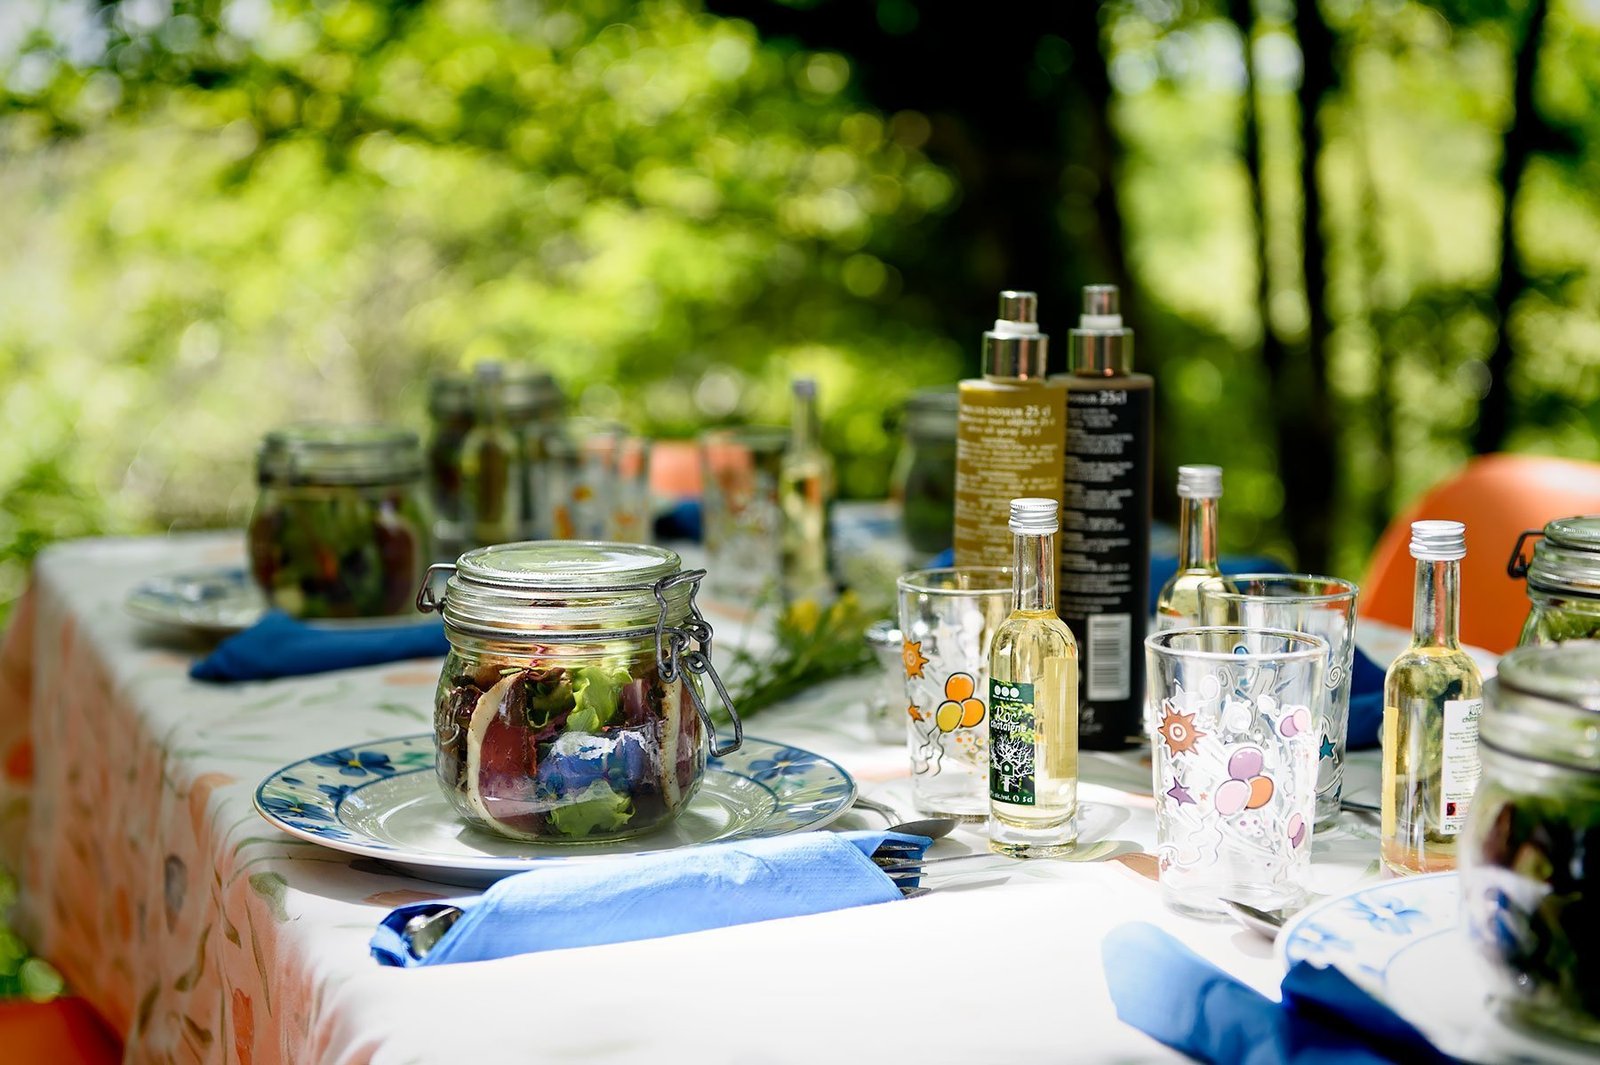 3 Amazing foodie experiences in the Dordogne Valley and Correze - A Gourmet Picnic overlooking the Valley